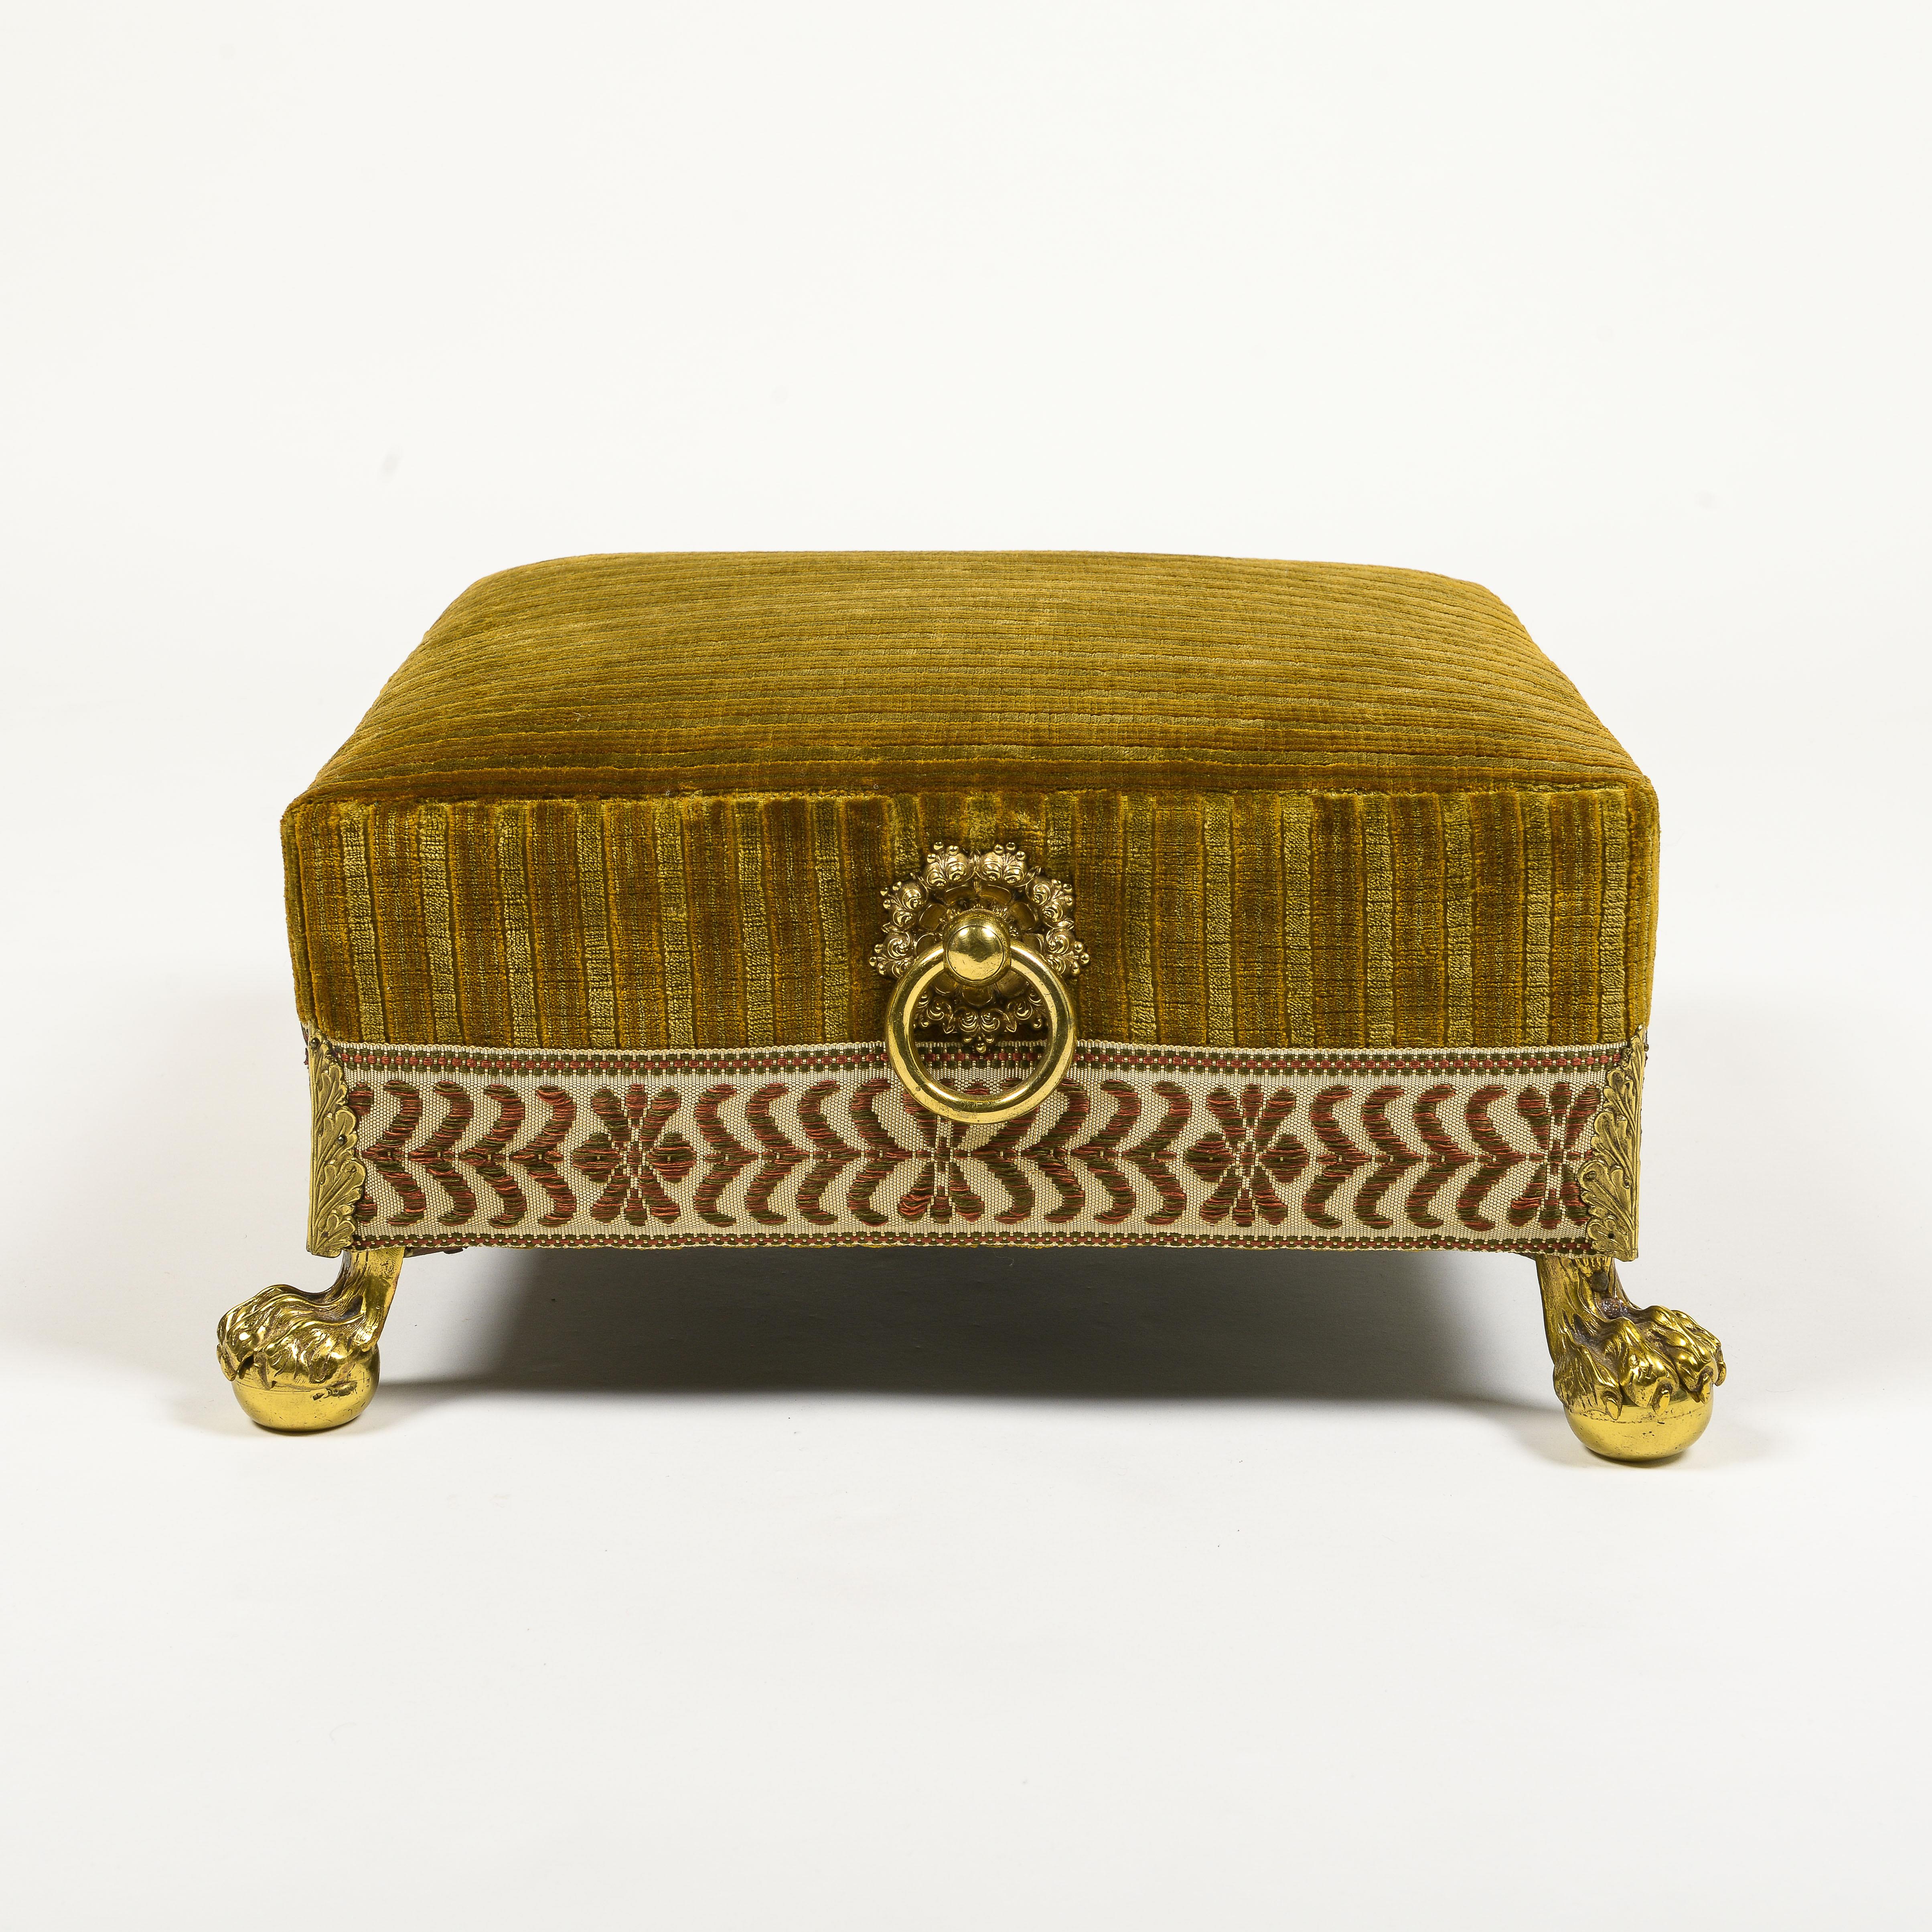 Covered in a gold linen velvet finished with a broad silk tape; mounted with brass carrying handles to the sides and raised on brass hairy paw feet issuing foliate sprays.